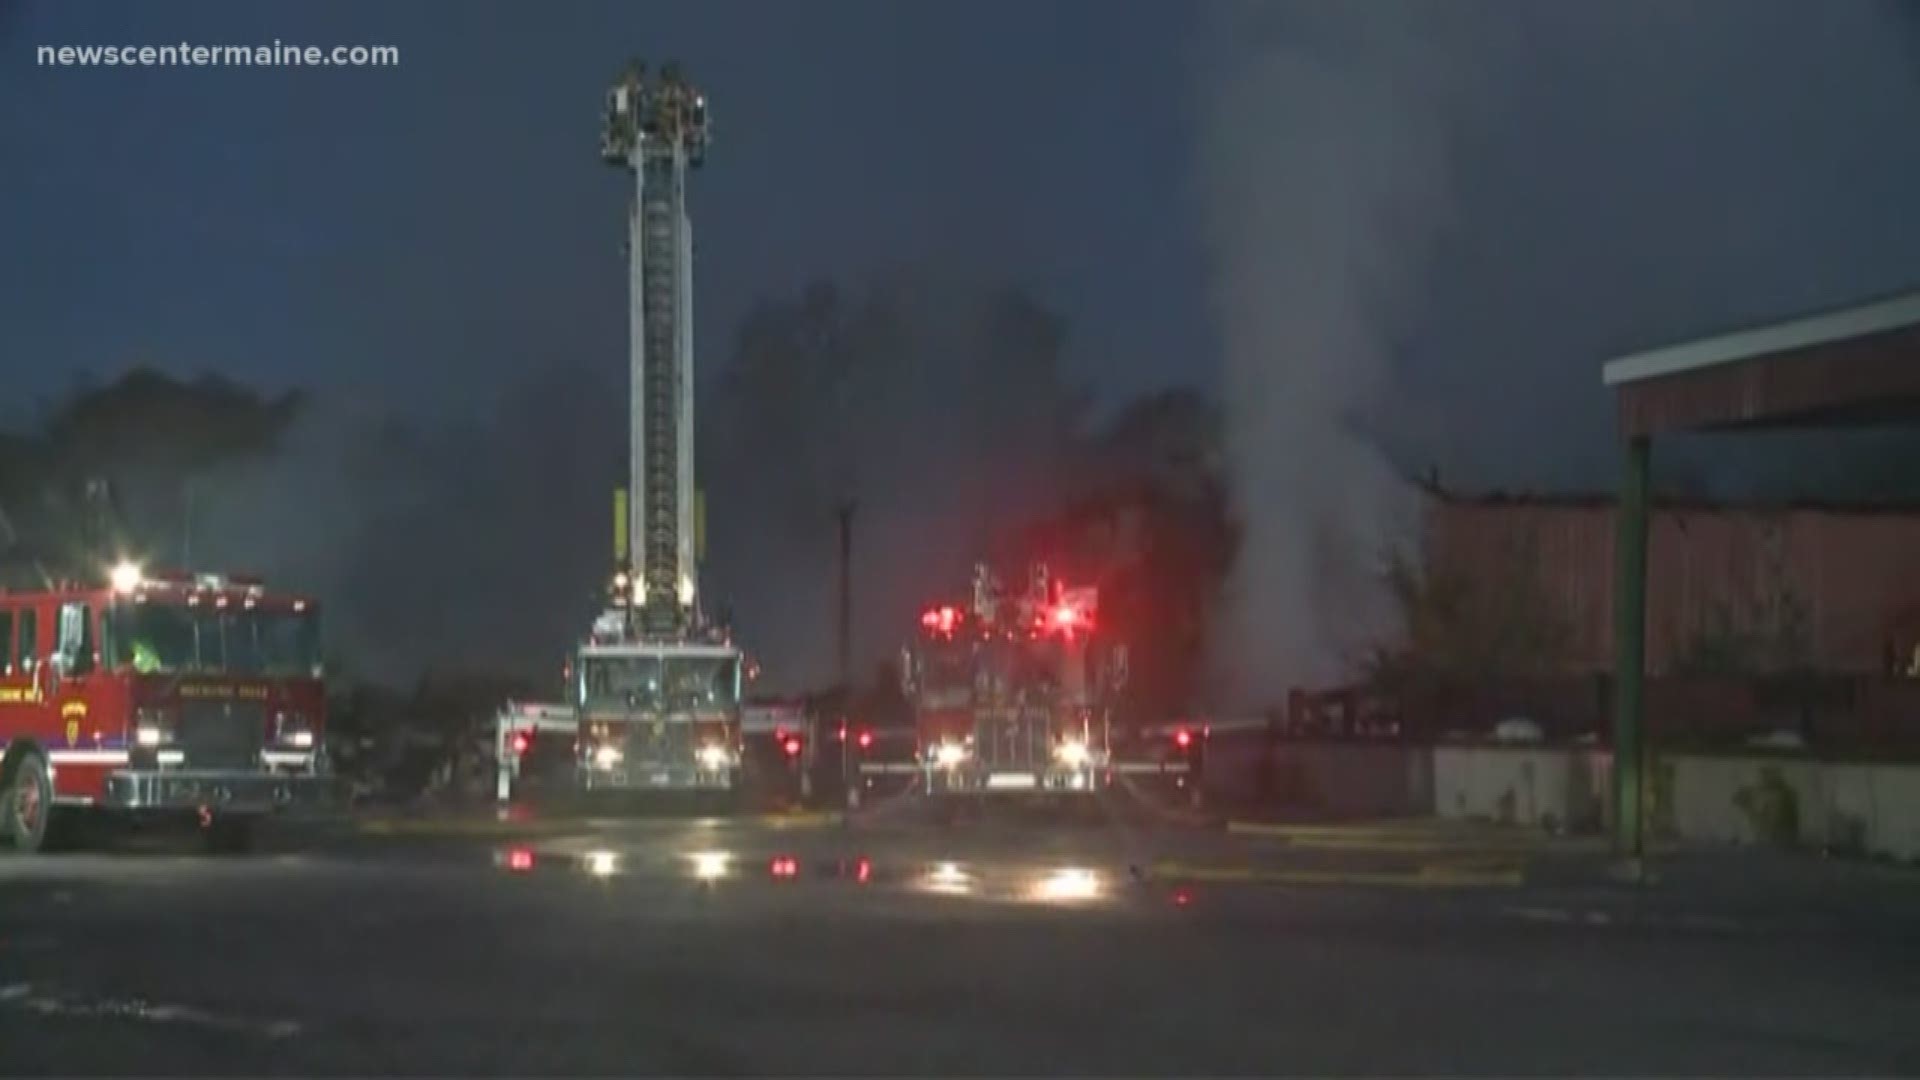 Katie Bavoso reports on a mill fire in Mechanic Falls